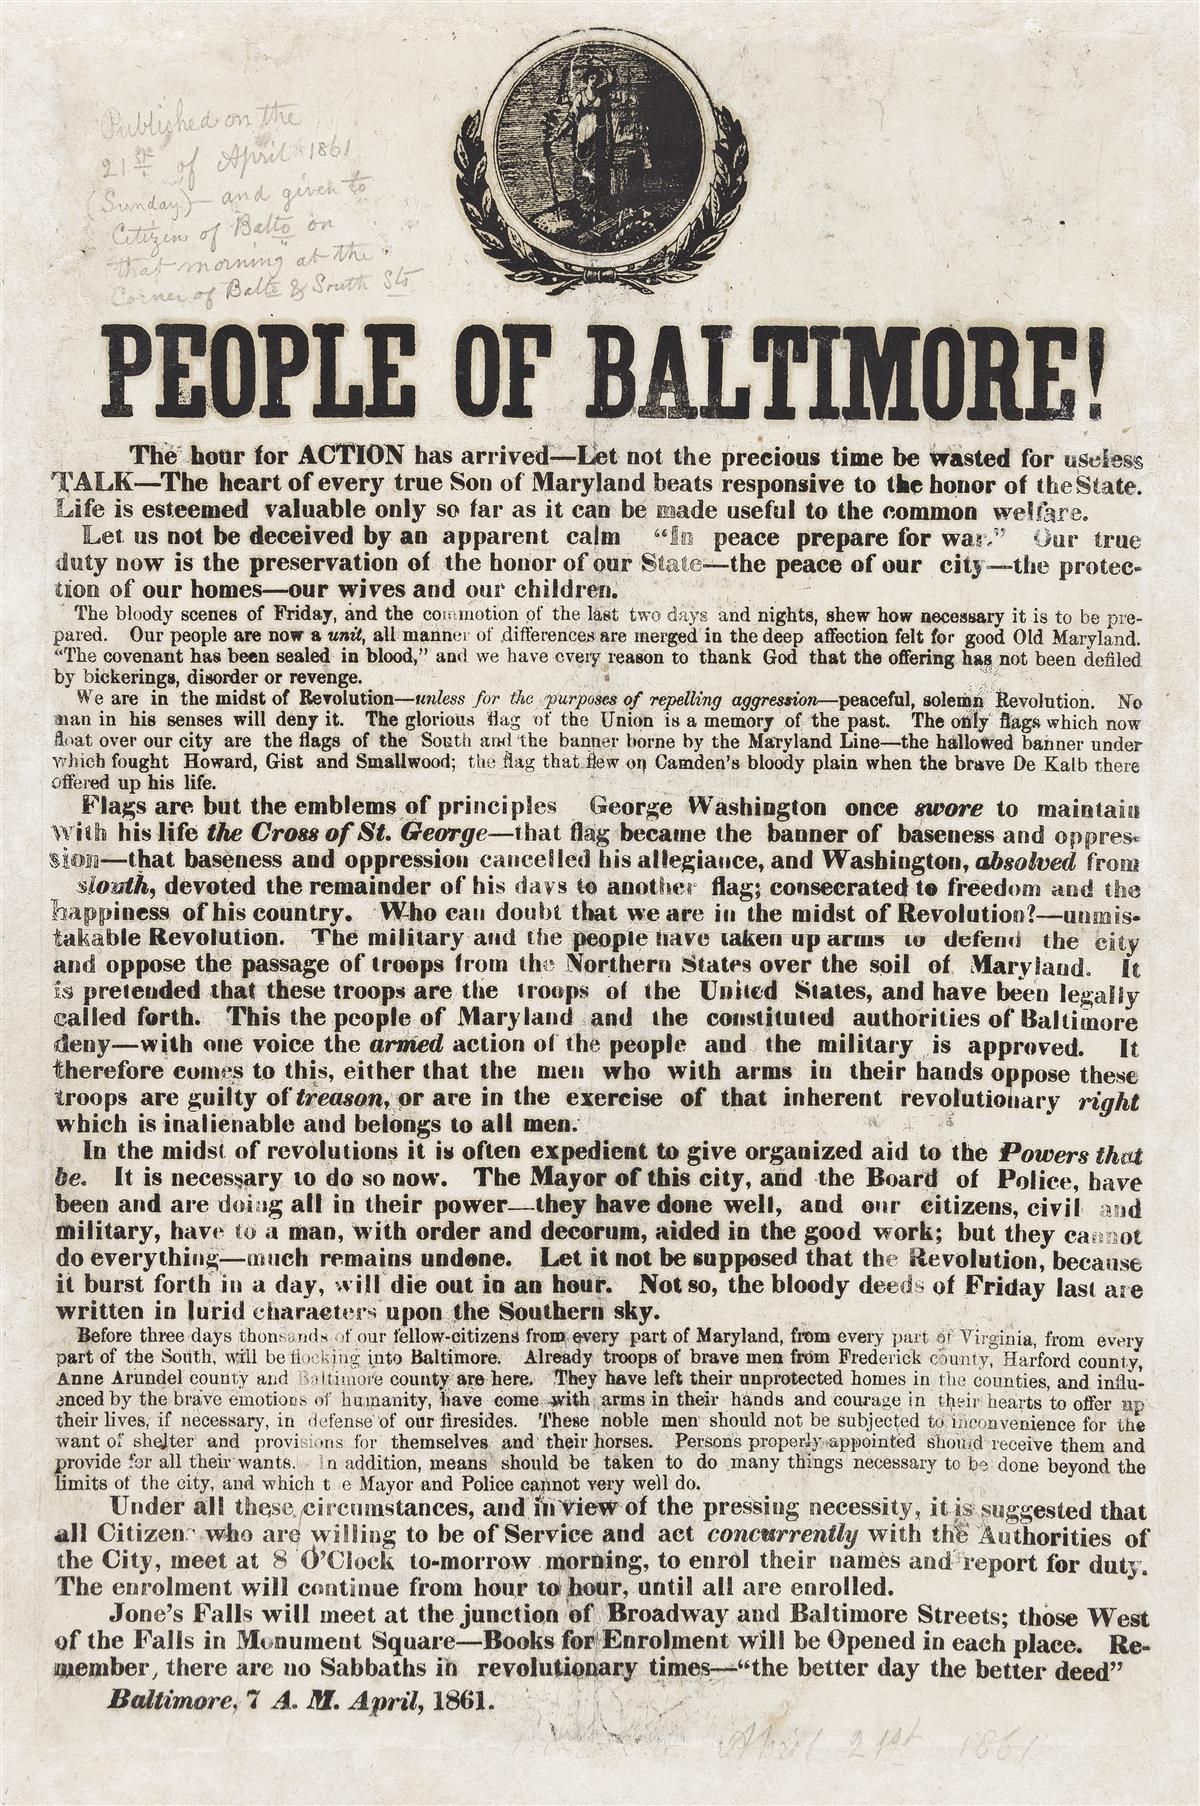 (CIVIL WAR--MARYLAND.) Secessionist recruitment broadside issued in the wake of the Baltimore Riot to the "People of Baltimore!"